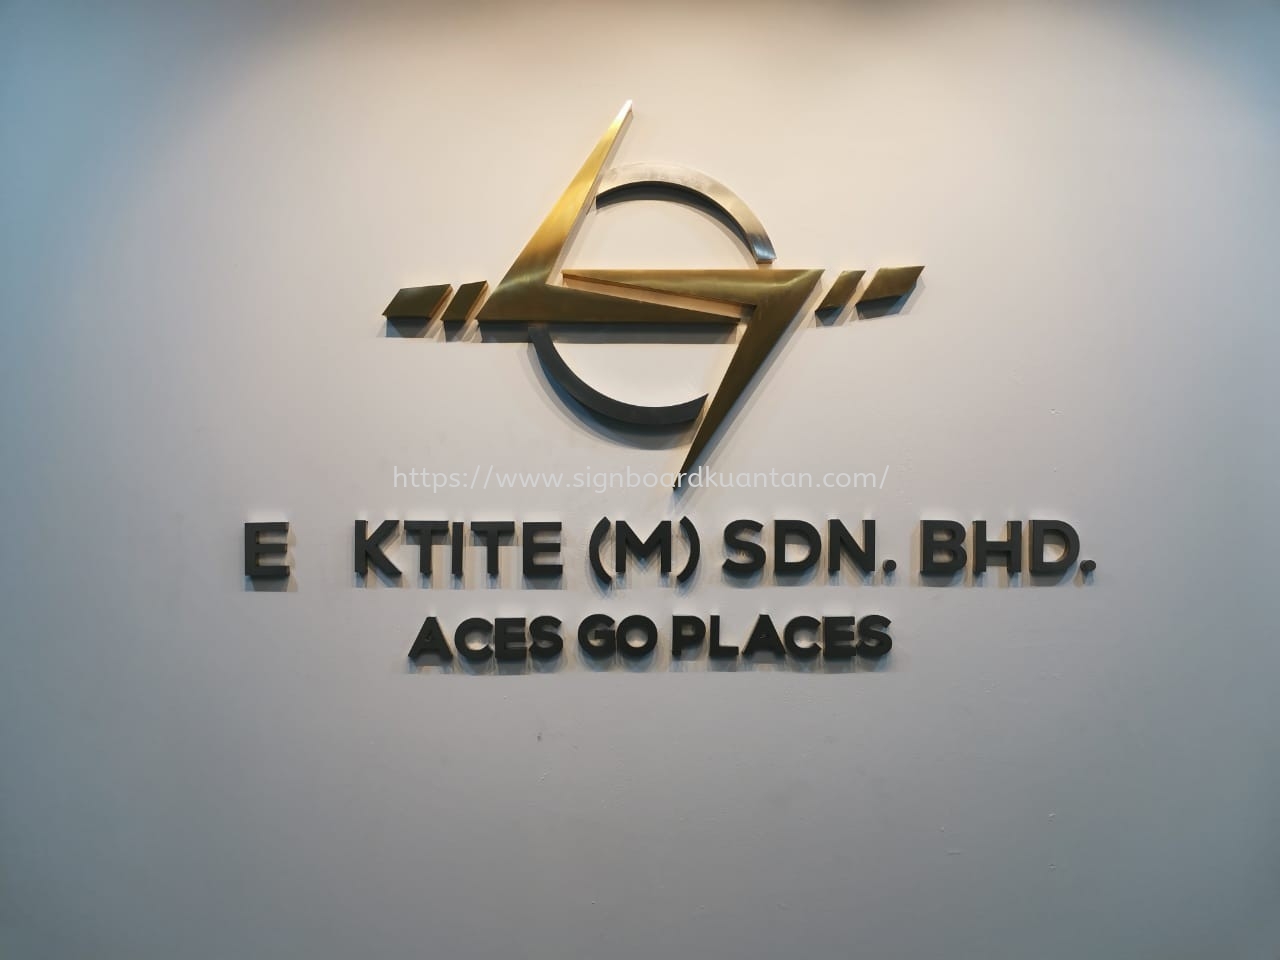 E KTITE(M) SDN BHD. INDOOR 3D BOX UP STAINLESS STEEL LETTERING WITHOUT LED AT KUANTAN PAHANG